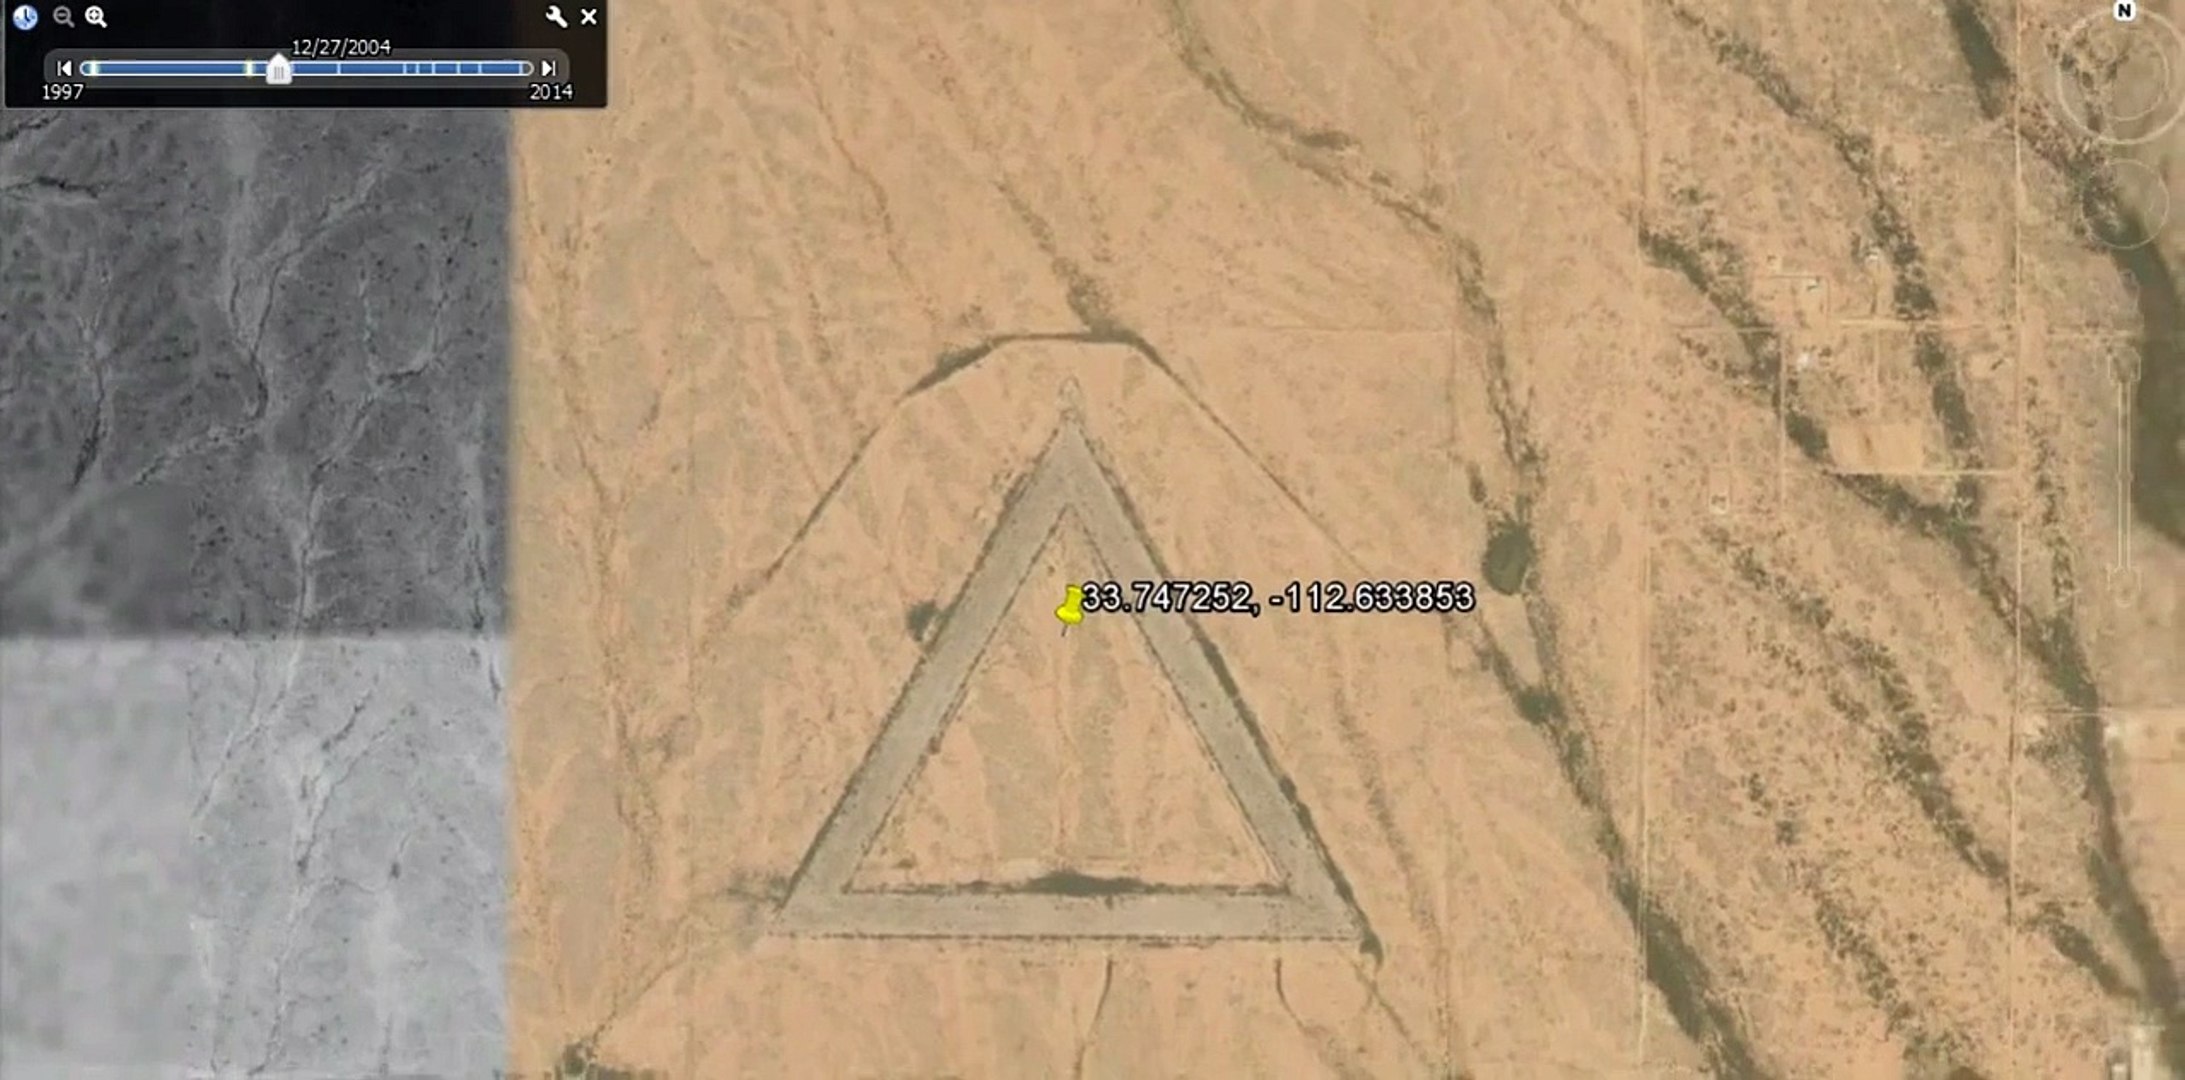 See Giant Triangle in Wittmann in Arizona, USA With Google Earth